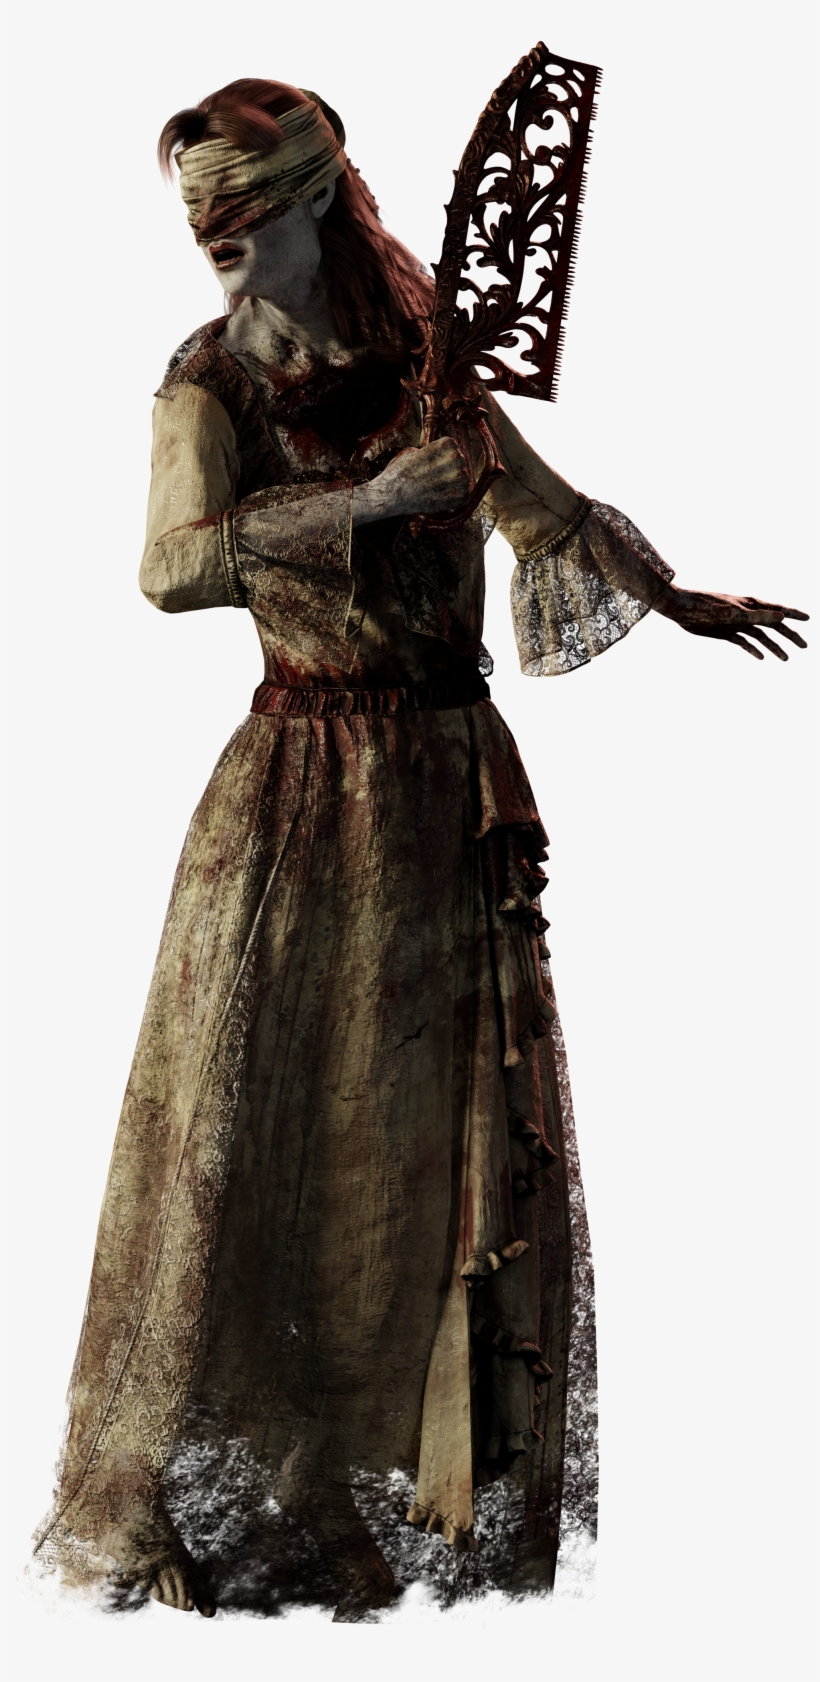 Fan Contentvalentine - Dead By Daylight Valentine's Day Cosmetics, transparent png #9696753